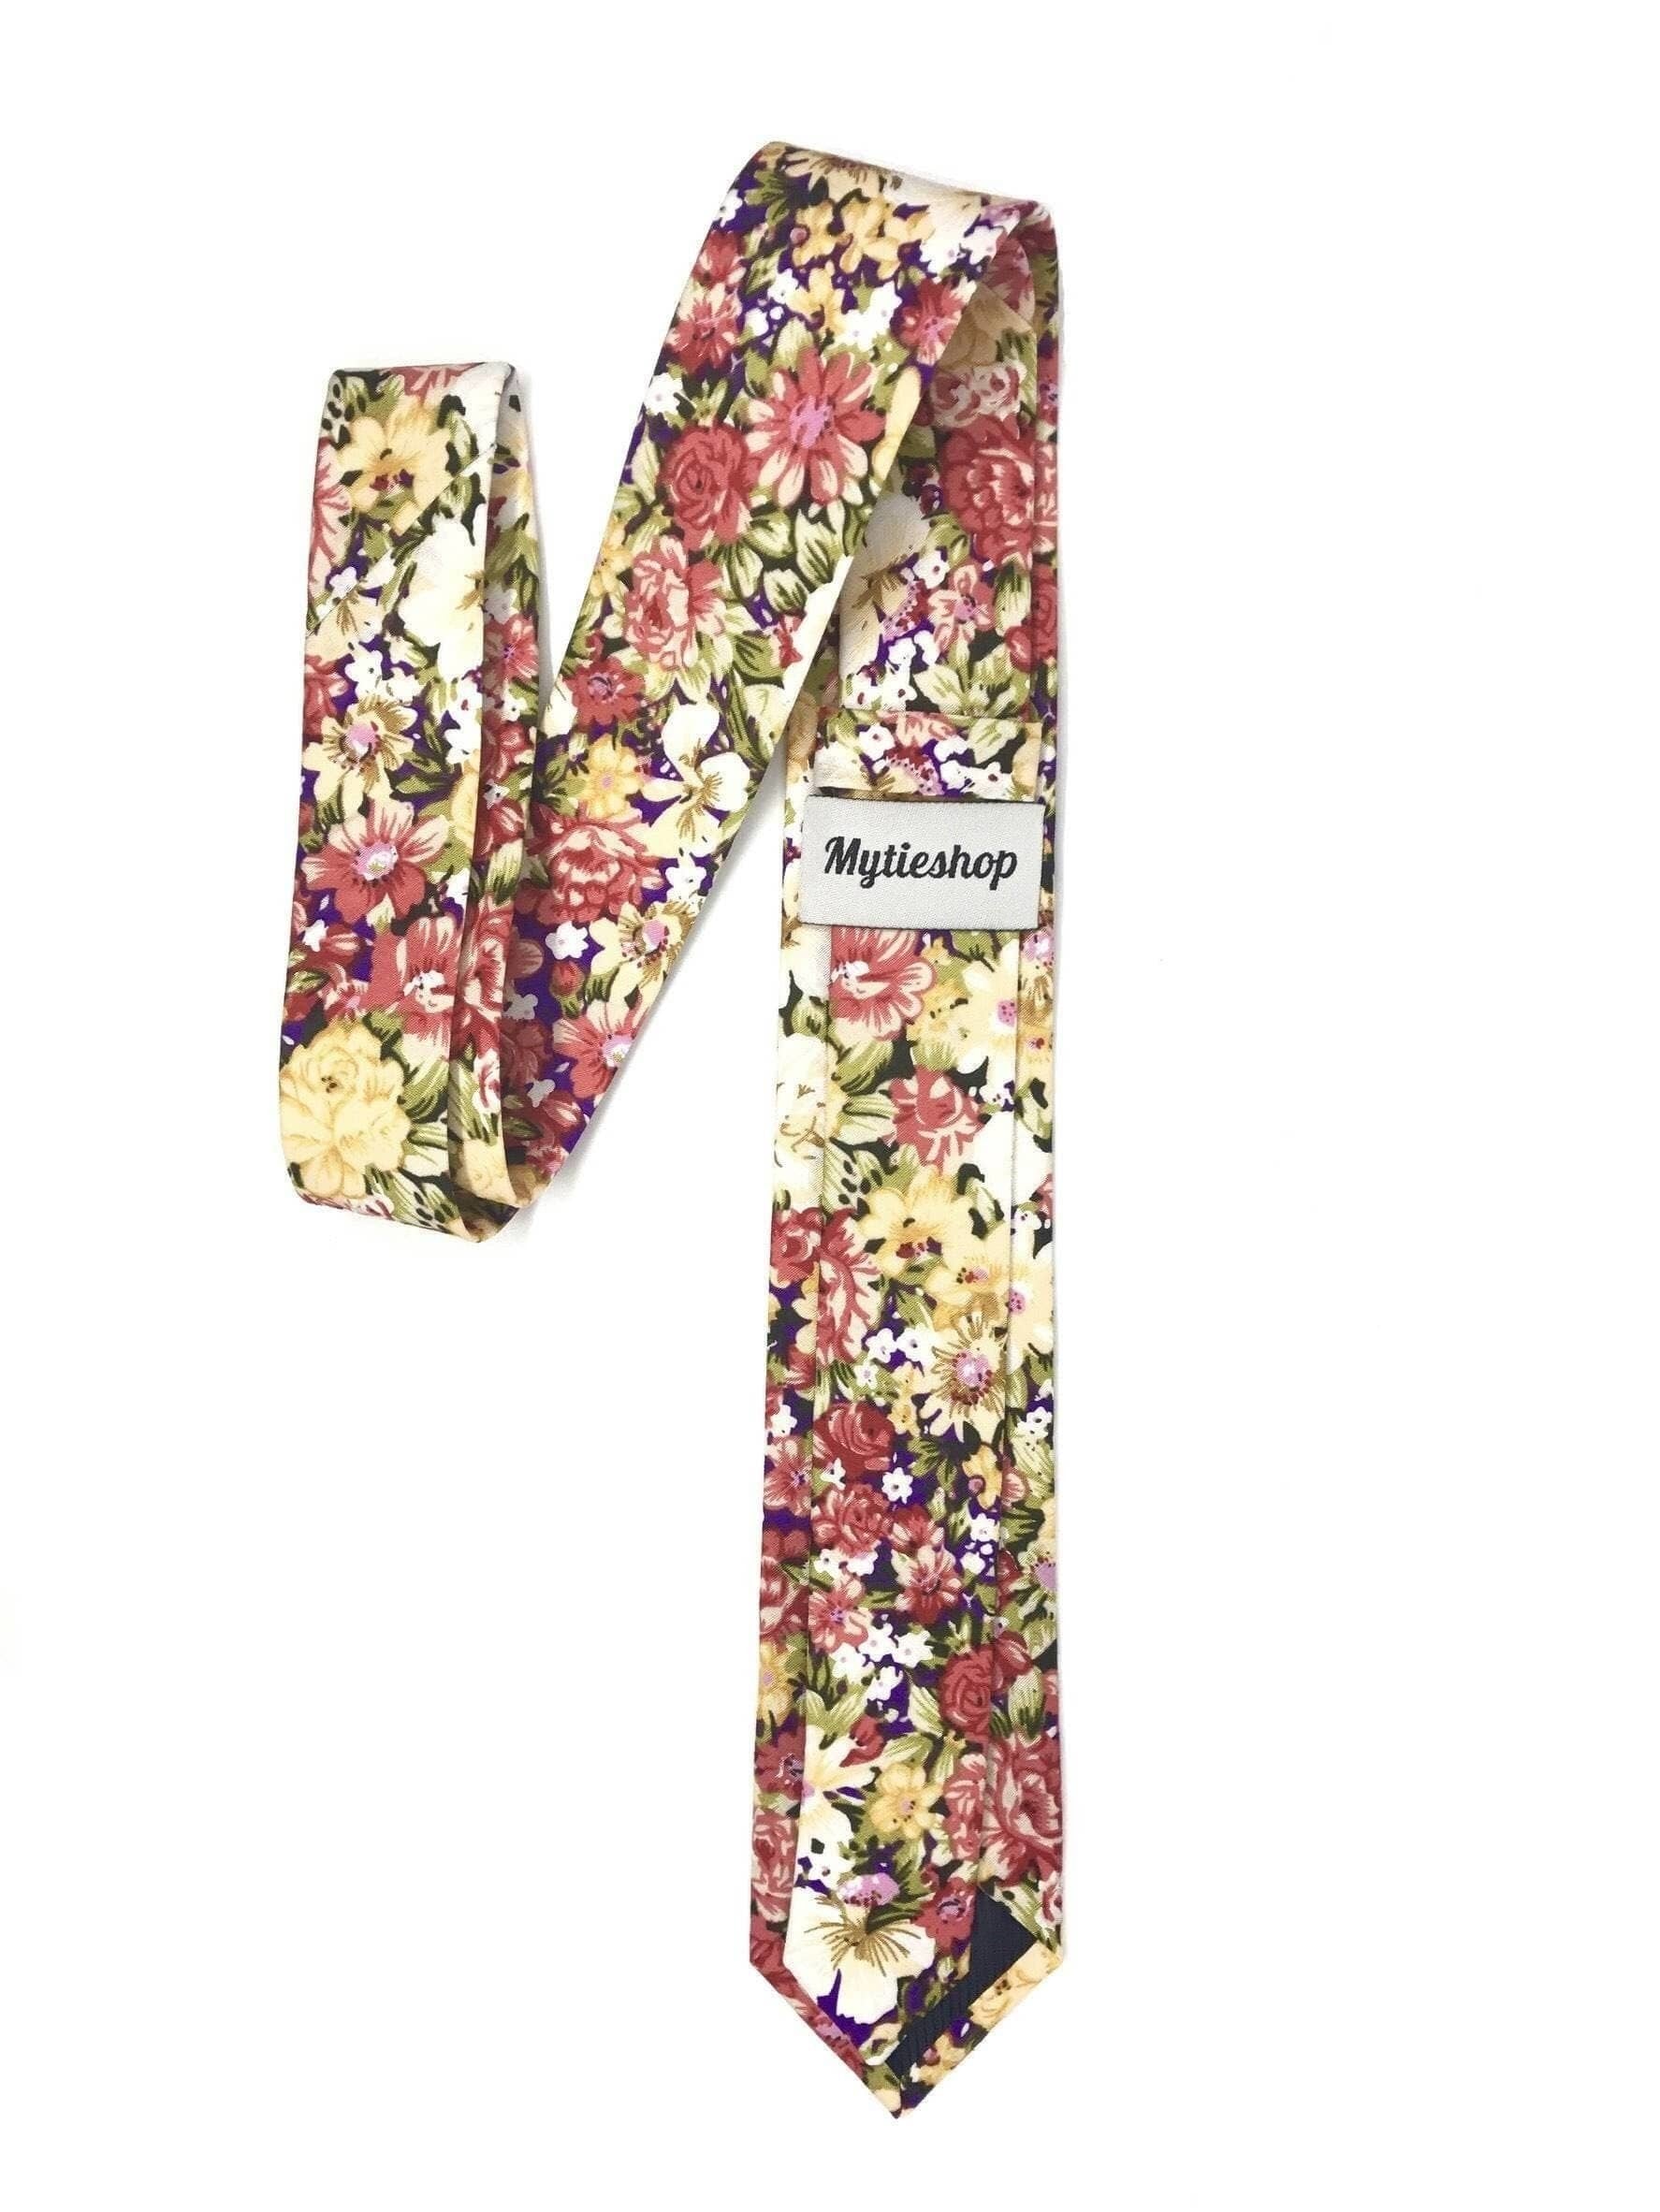 JACKSON Floral Skinny Tie 2.36"-Neckties-JACKSON Floral Skinny Tie weddings and events, great for prom and anniversary gifts. Mens floral ties near me us ties tie shops cool ties-Mytieshop. Skinny ties for weddings anniversaries. Father of bride. Groomsmen. Cool skinny neckties for men. Neckwear for prom, missions and fancy events. Gift ideas for men. Anniversaries ideas. Wedding aesthetics. Flower ties. Dry flower ties.